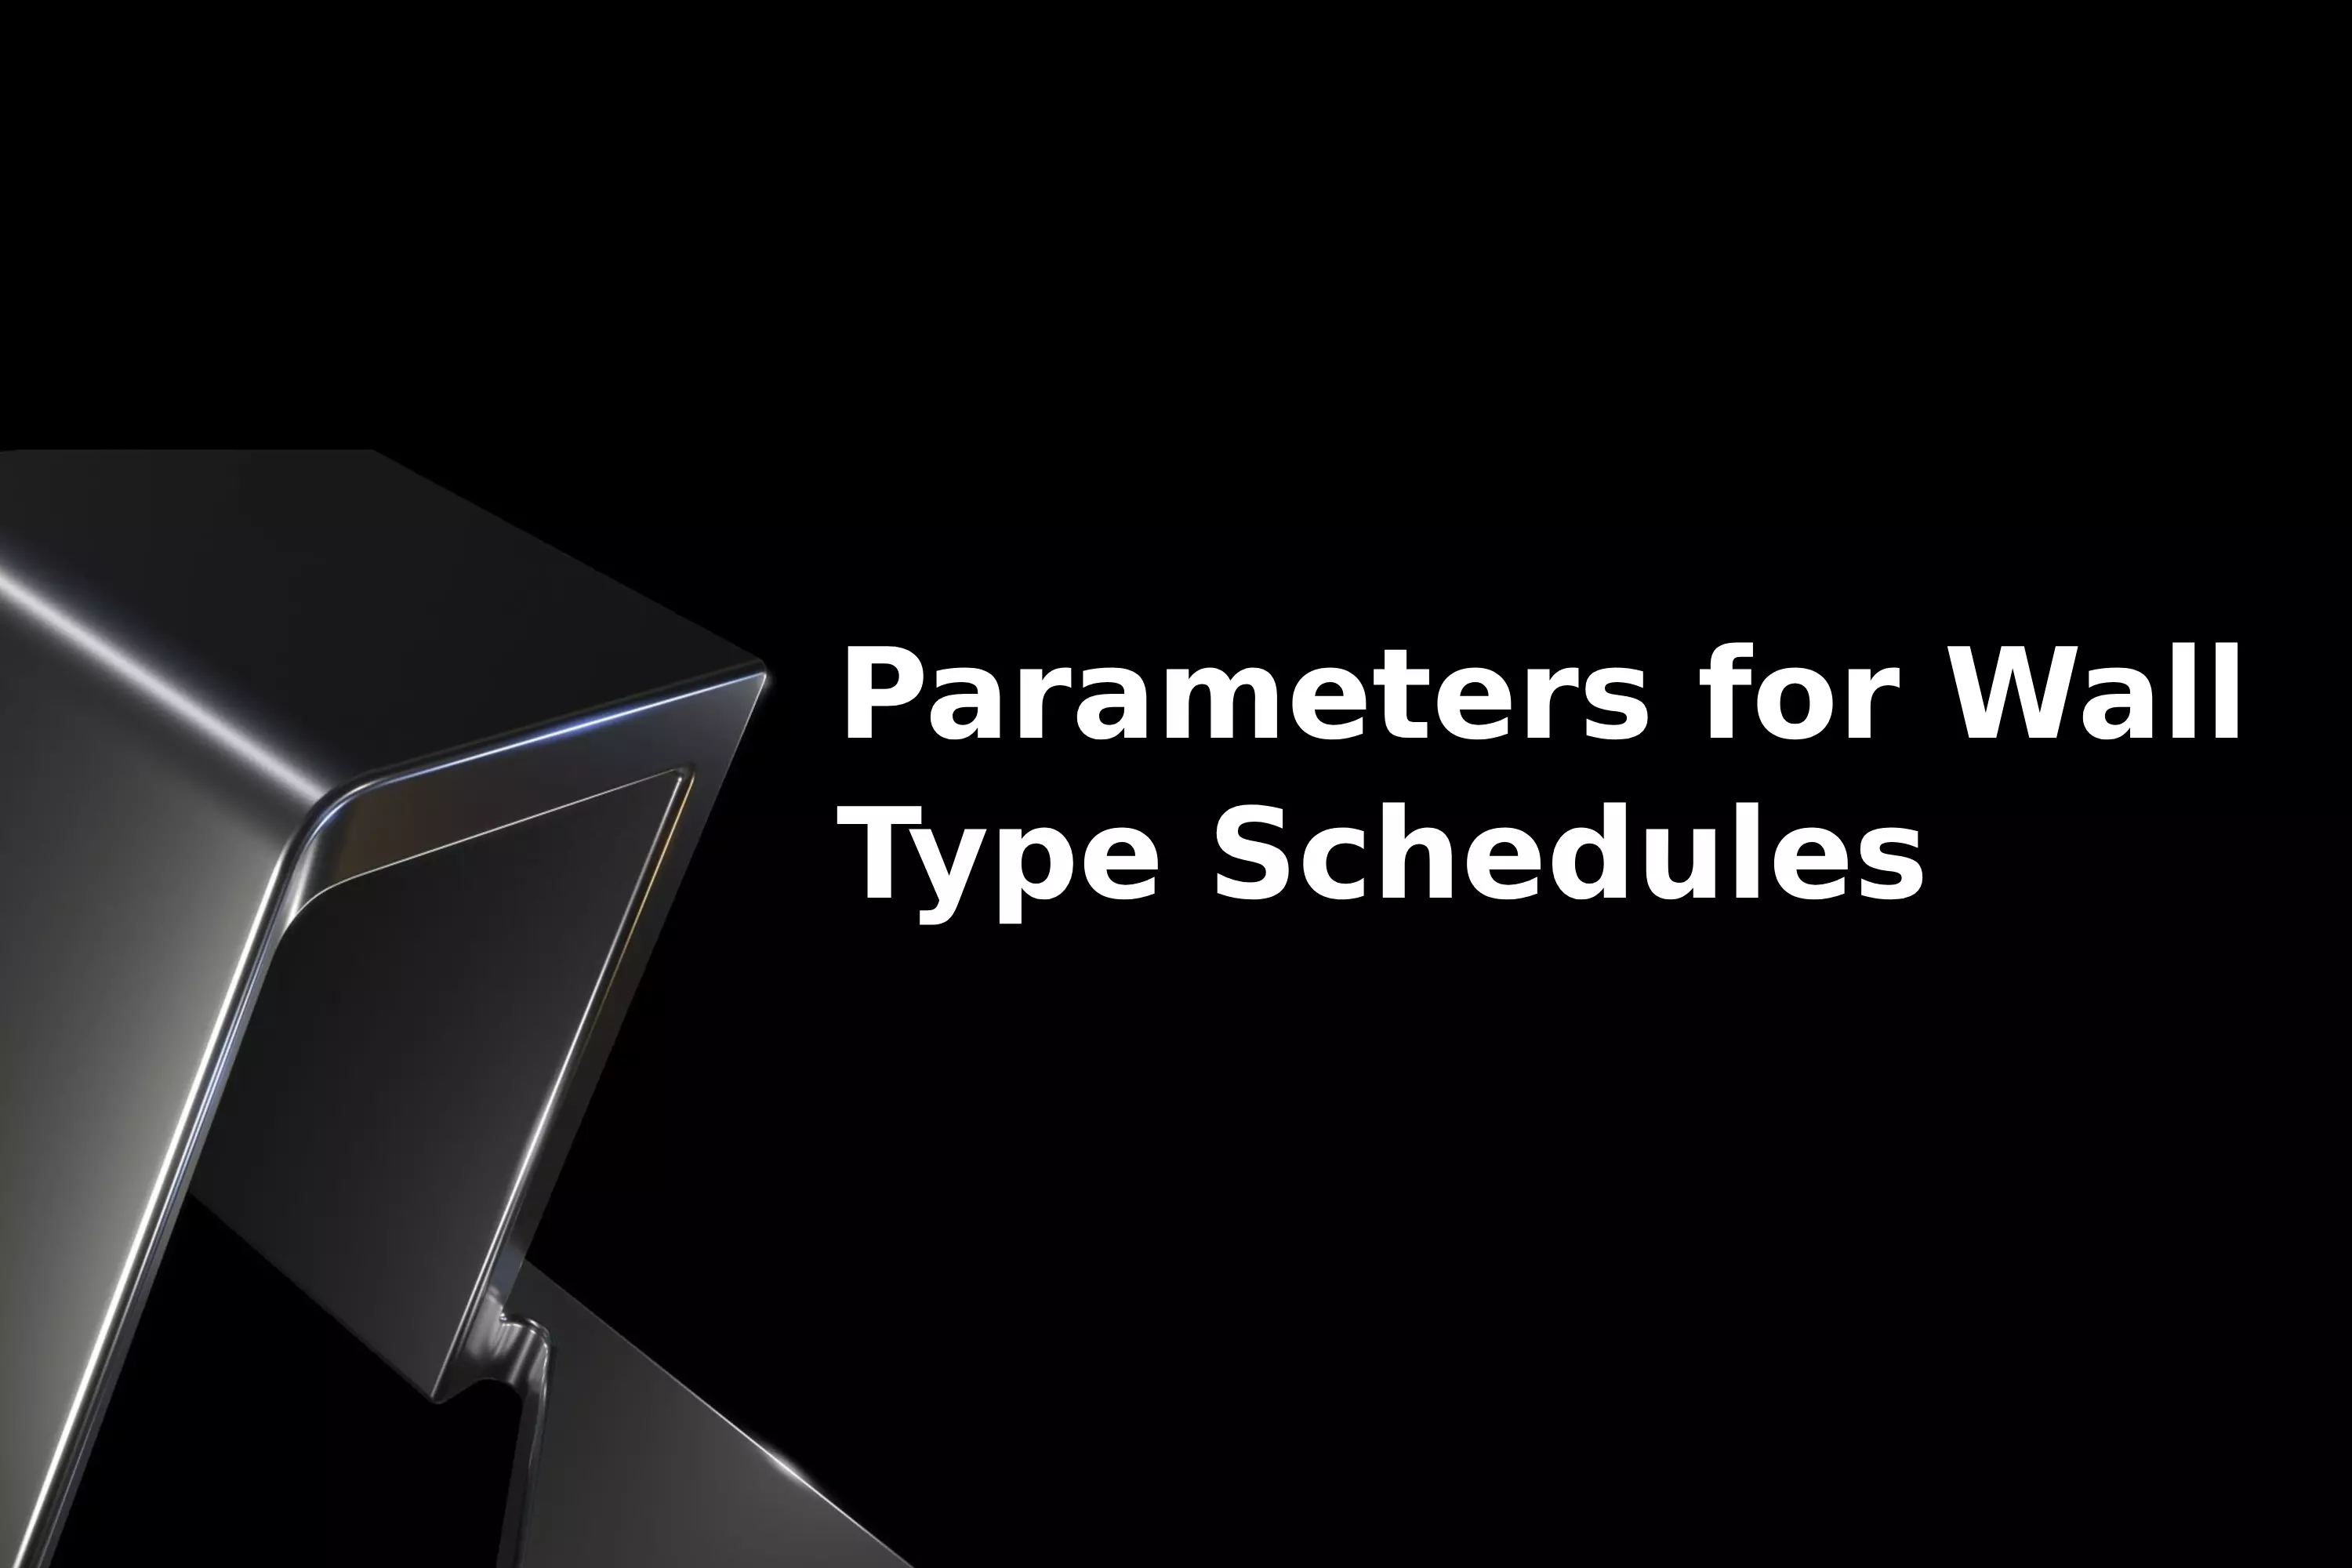 Parameters for Wall Type Schedules